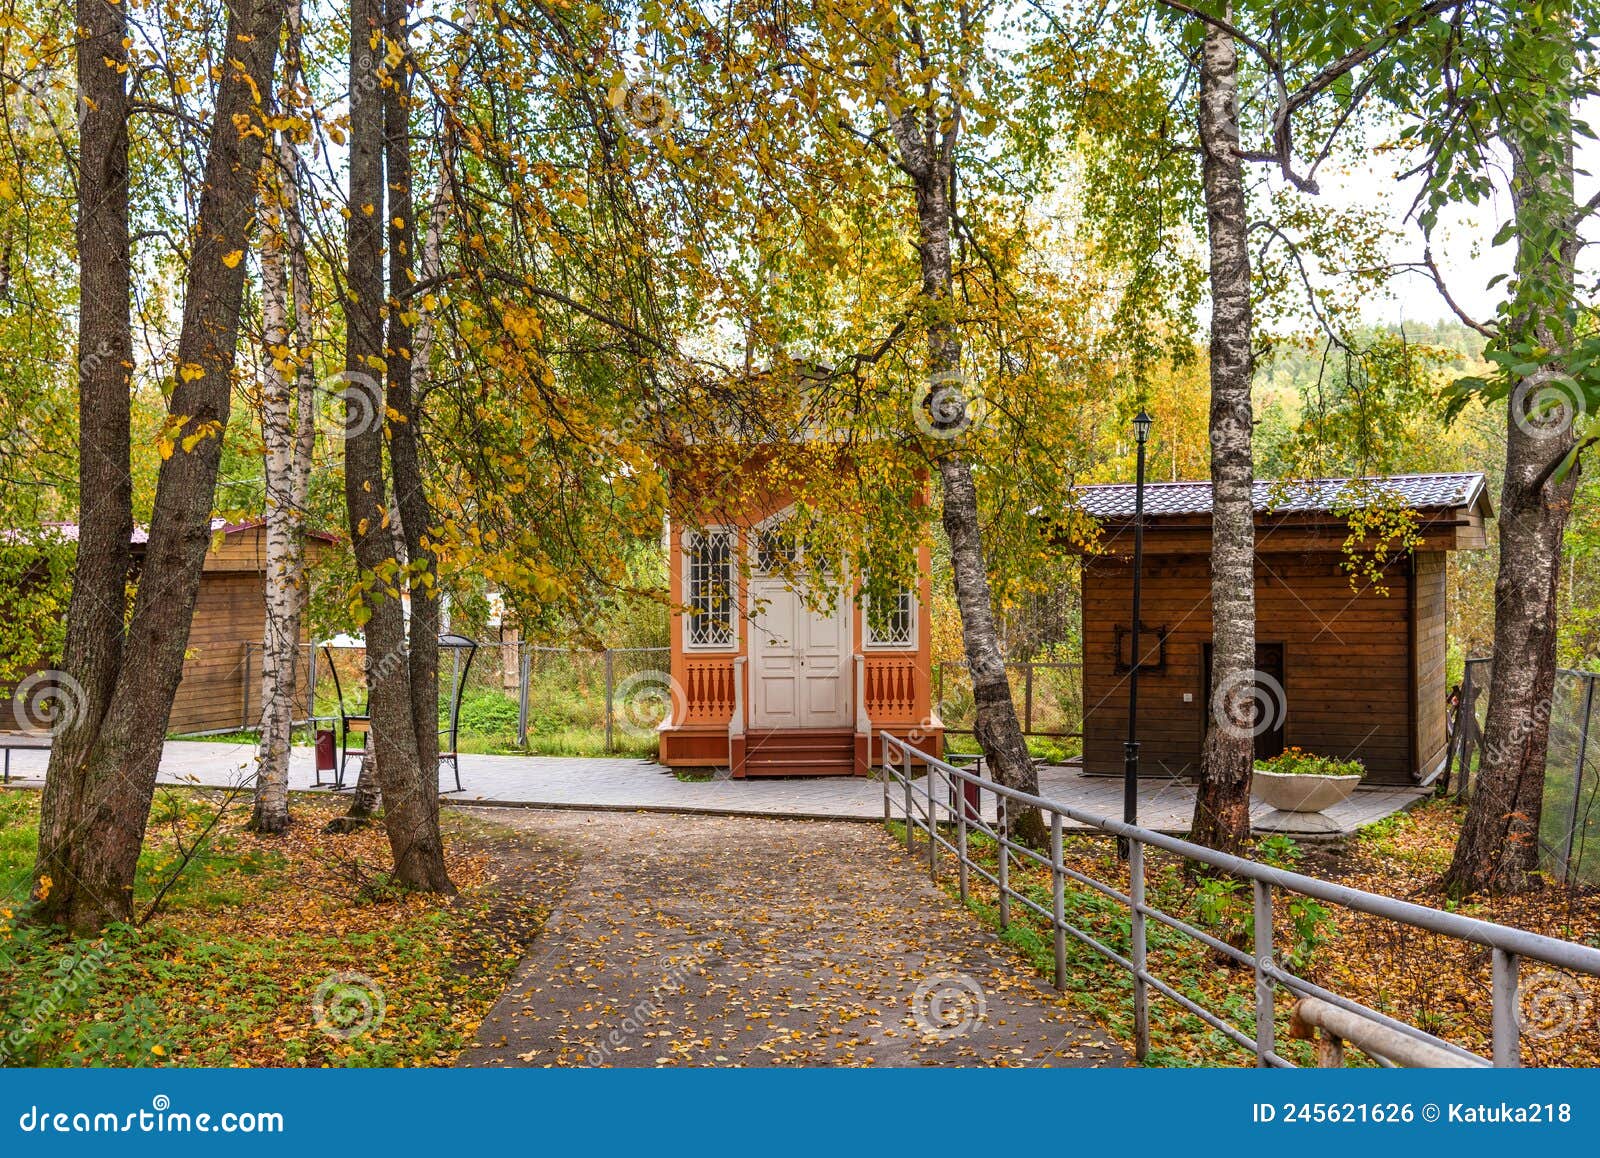 wooden pavilion above a mineral spring in the mud spa resort of marcial waters in karelia, russia